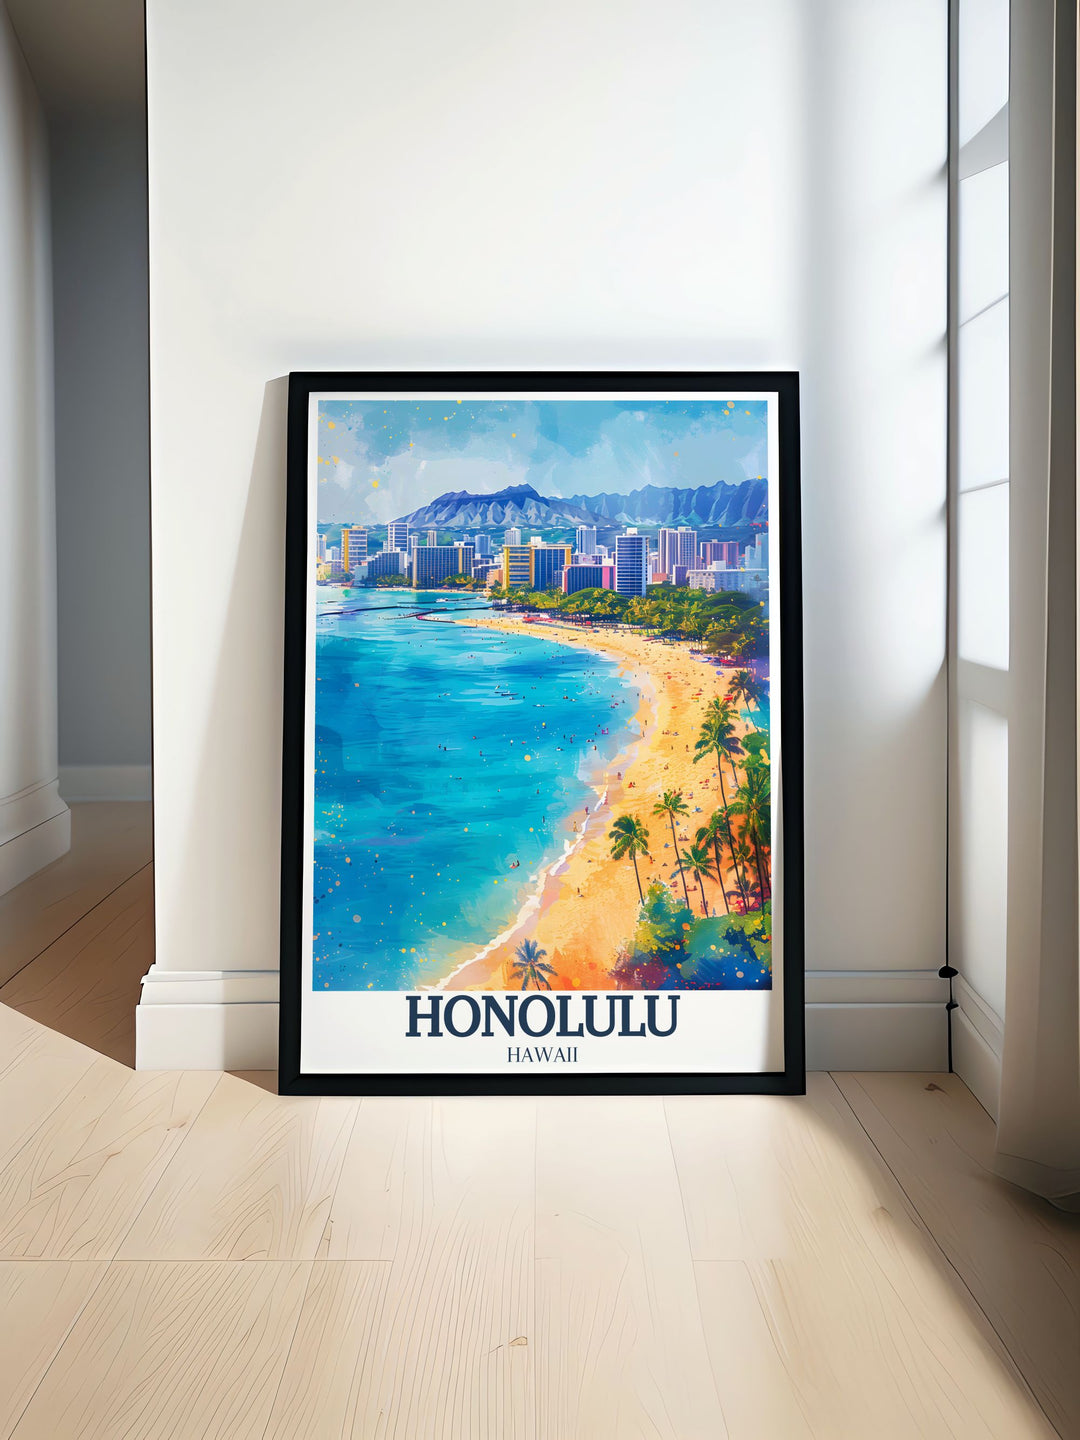 Fine art print of Honolulu featuring the stunning Waikiki Beach in Hawaii. This poster captures the beachs vibrant atmosphere and serene beauty, perfect for lovers of tropical destinations and island culture.